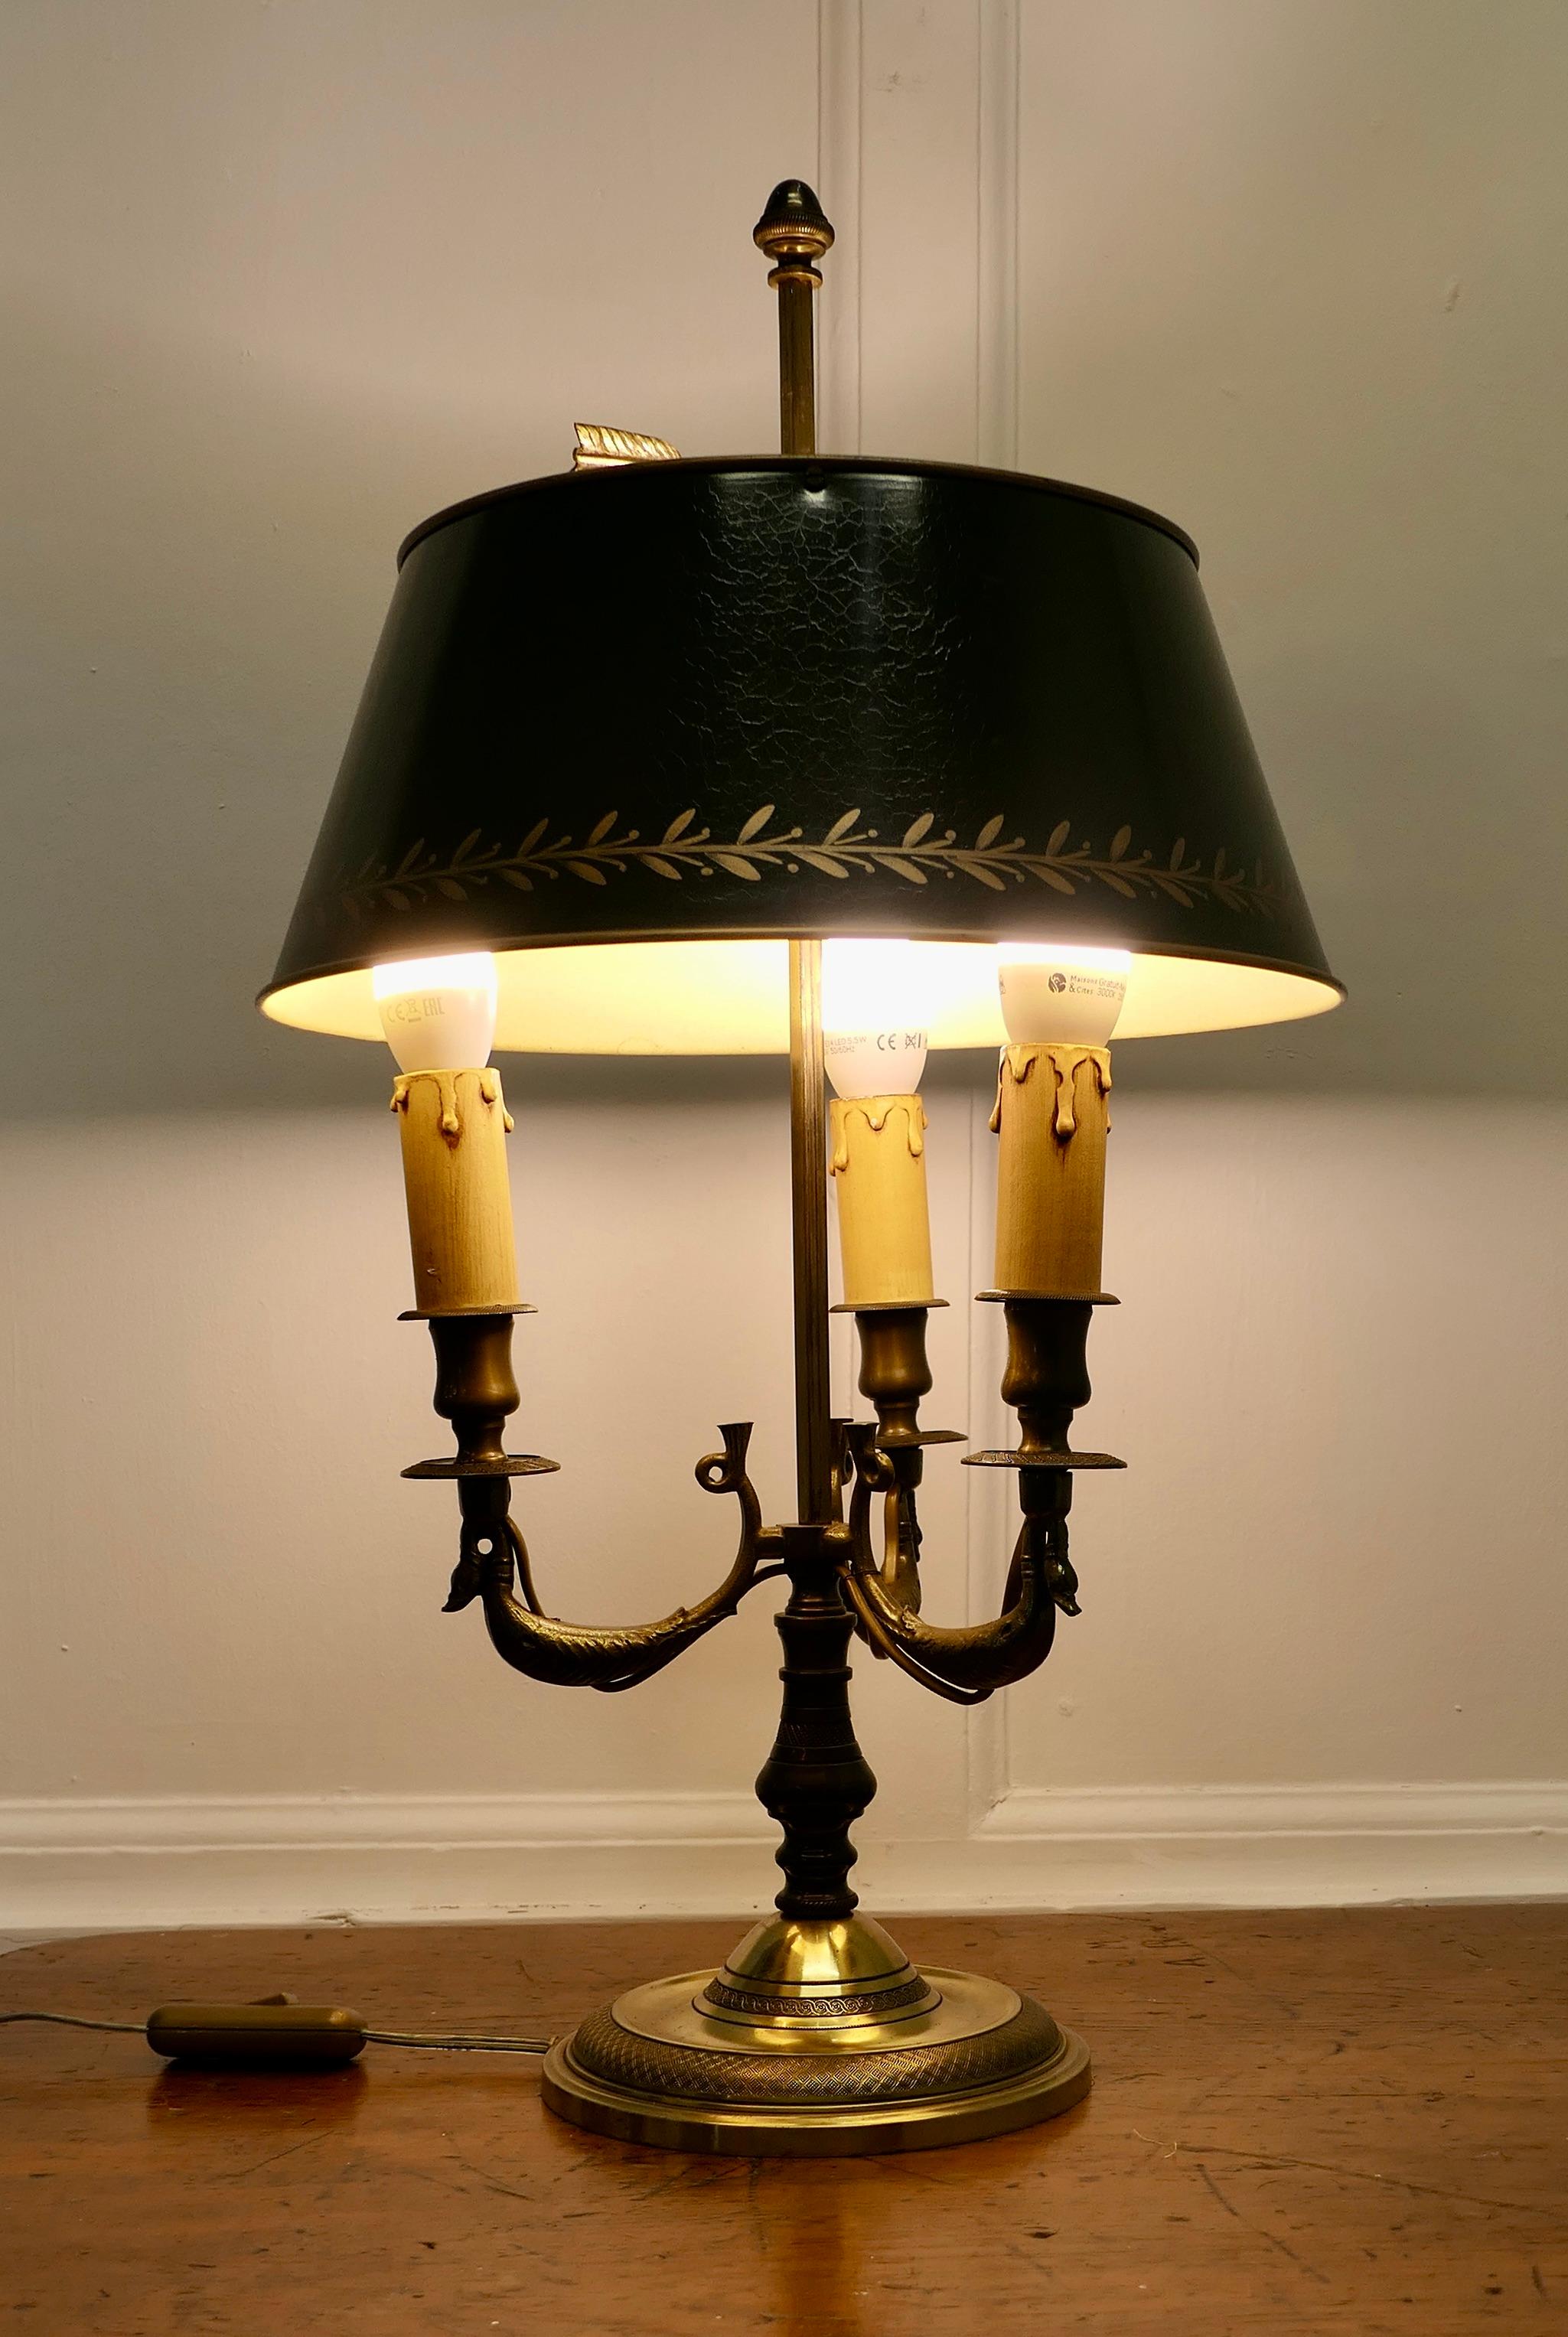 French Painted Toleware and Brass Triple Desk Lamp

A lovely piece, a brass triple sconce lamp with its original adjustable toleware shade 
A Very traditional design with three large birds presumably those who provide the quills and the arrow